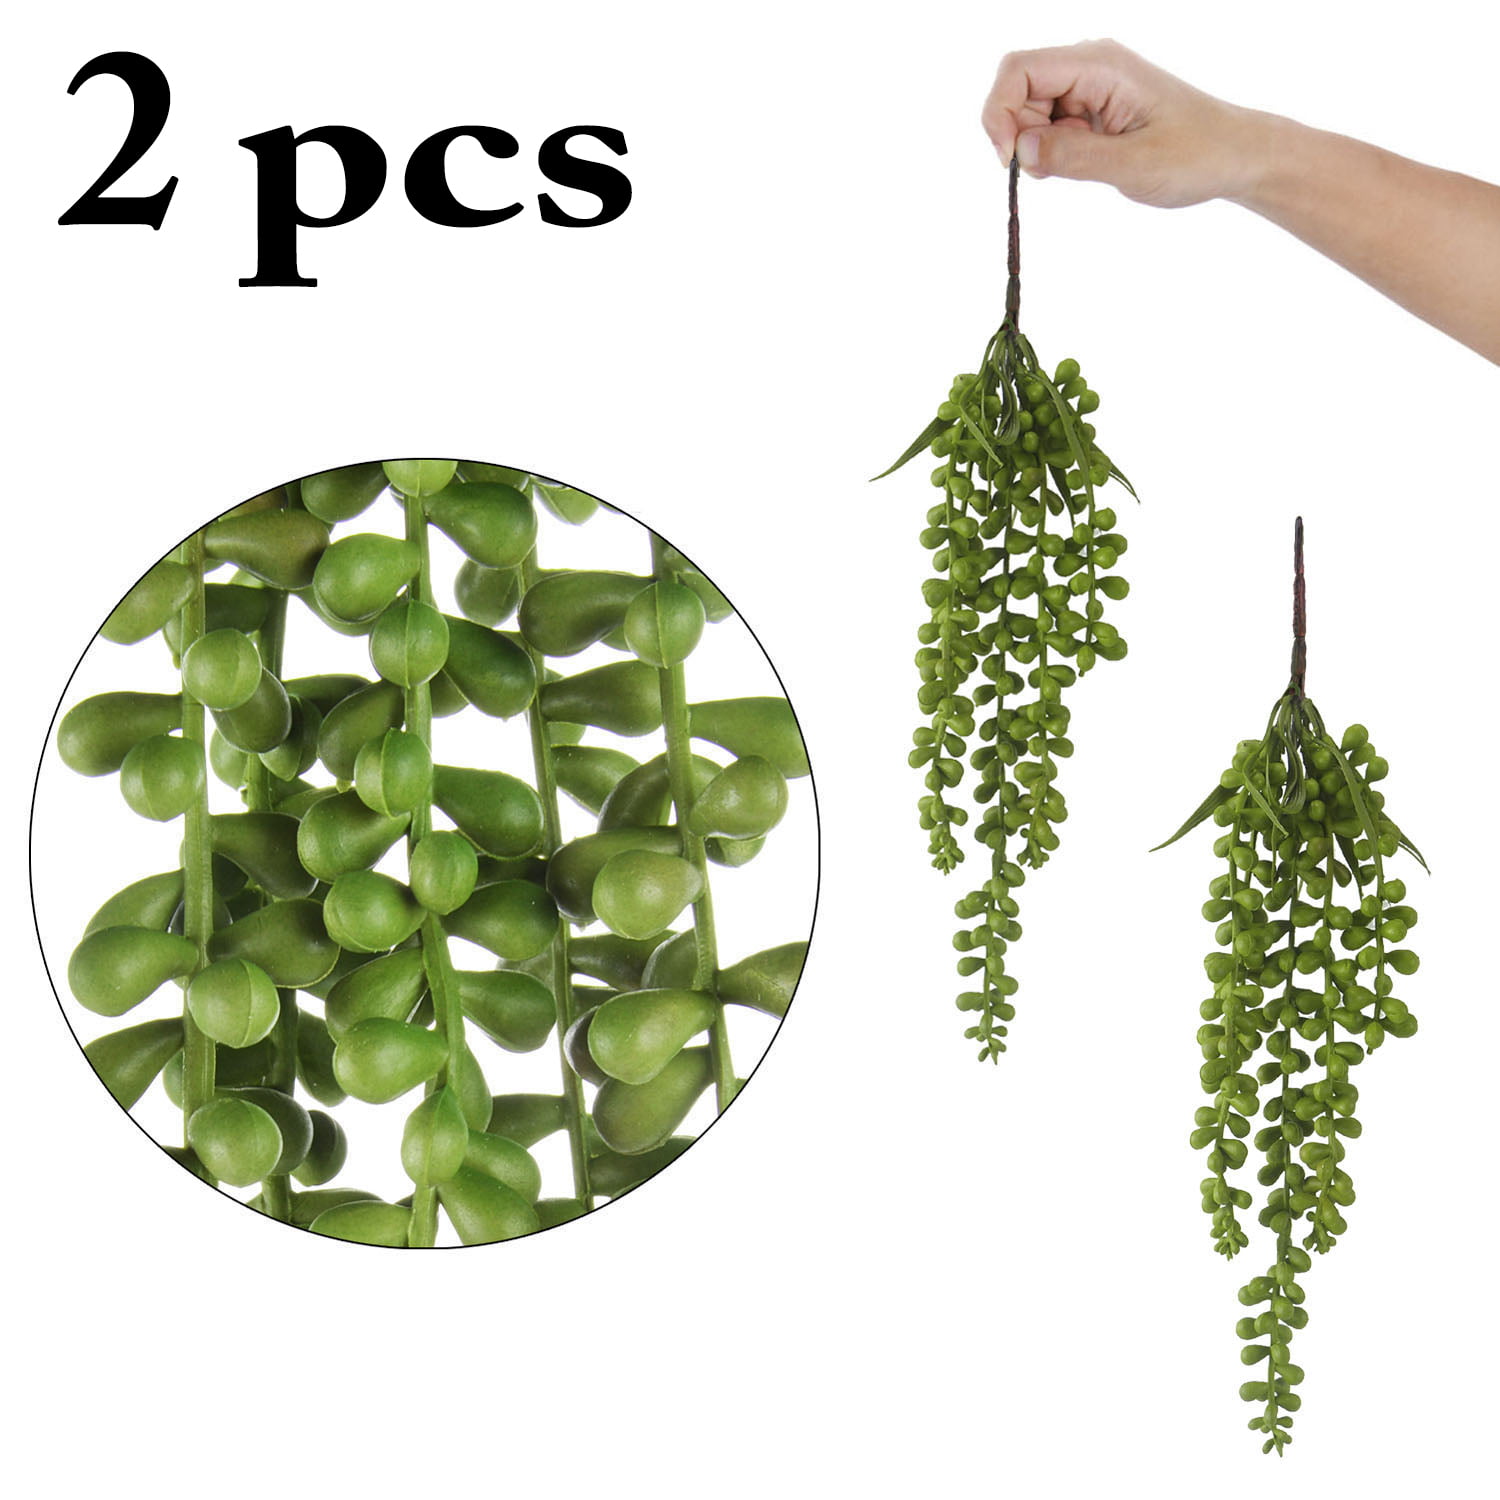 Nktier 2pcs Artificial Hanging Plant,Fake Succulent String of Pearls Fake Hanging Vine for Wedding Party Home Garden Wall Decoration (Green), Other